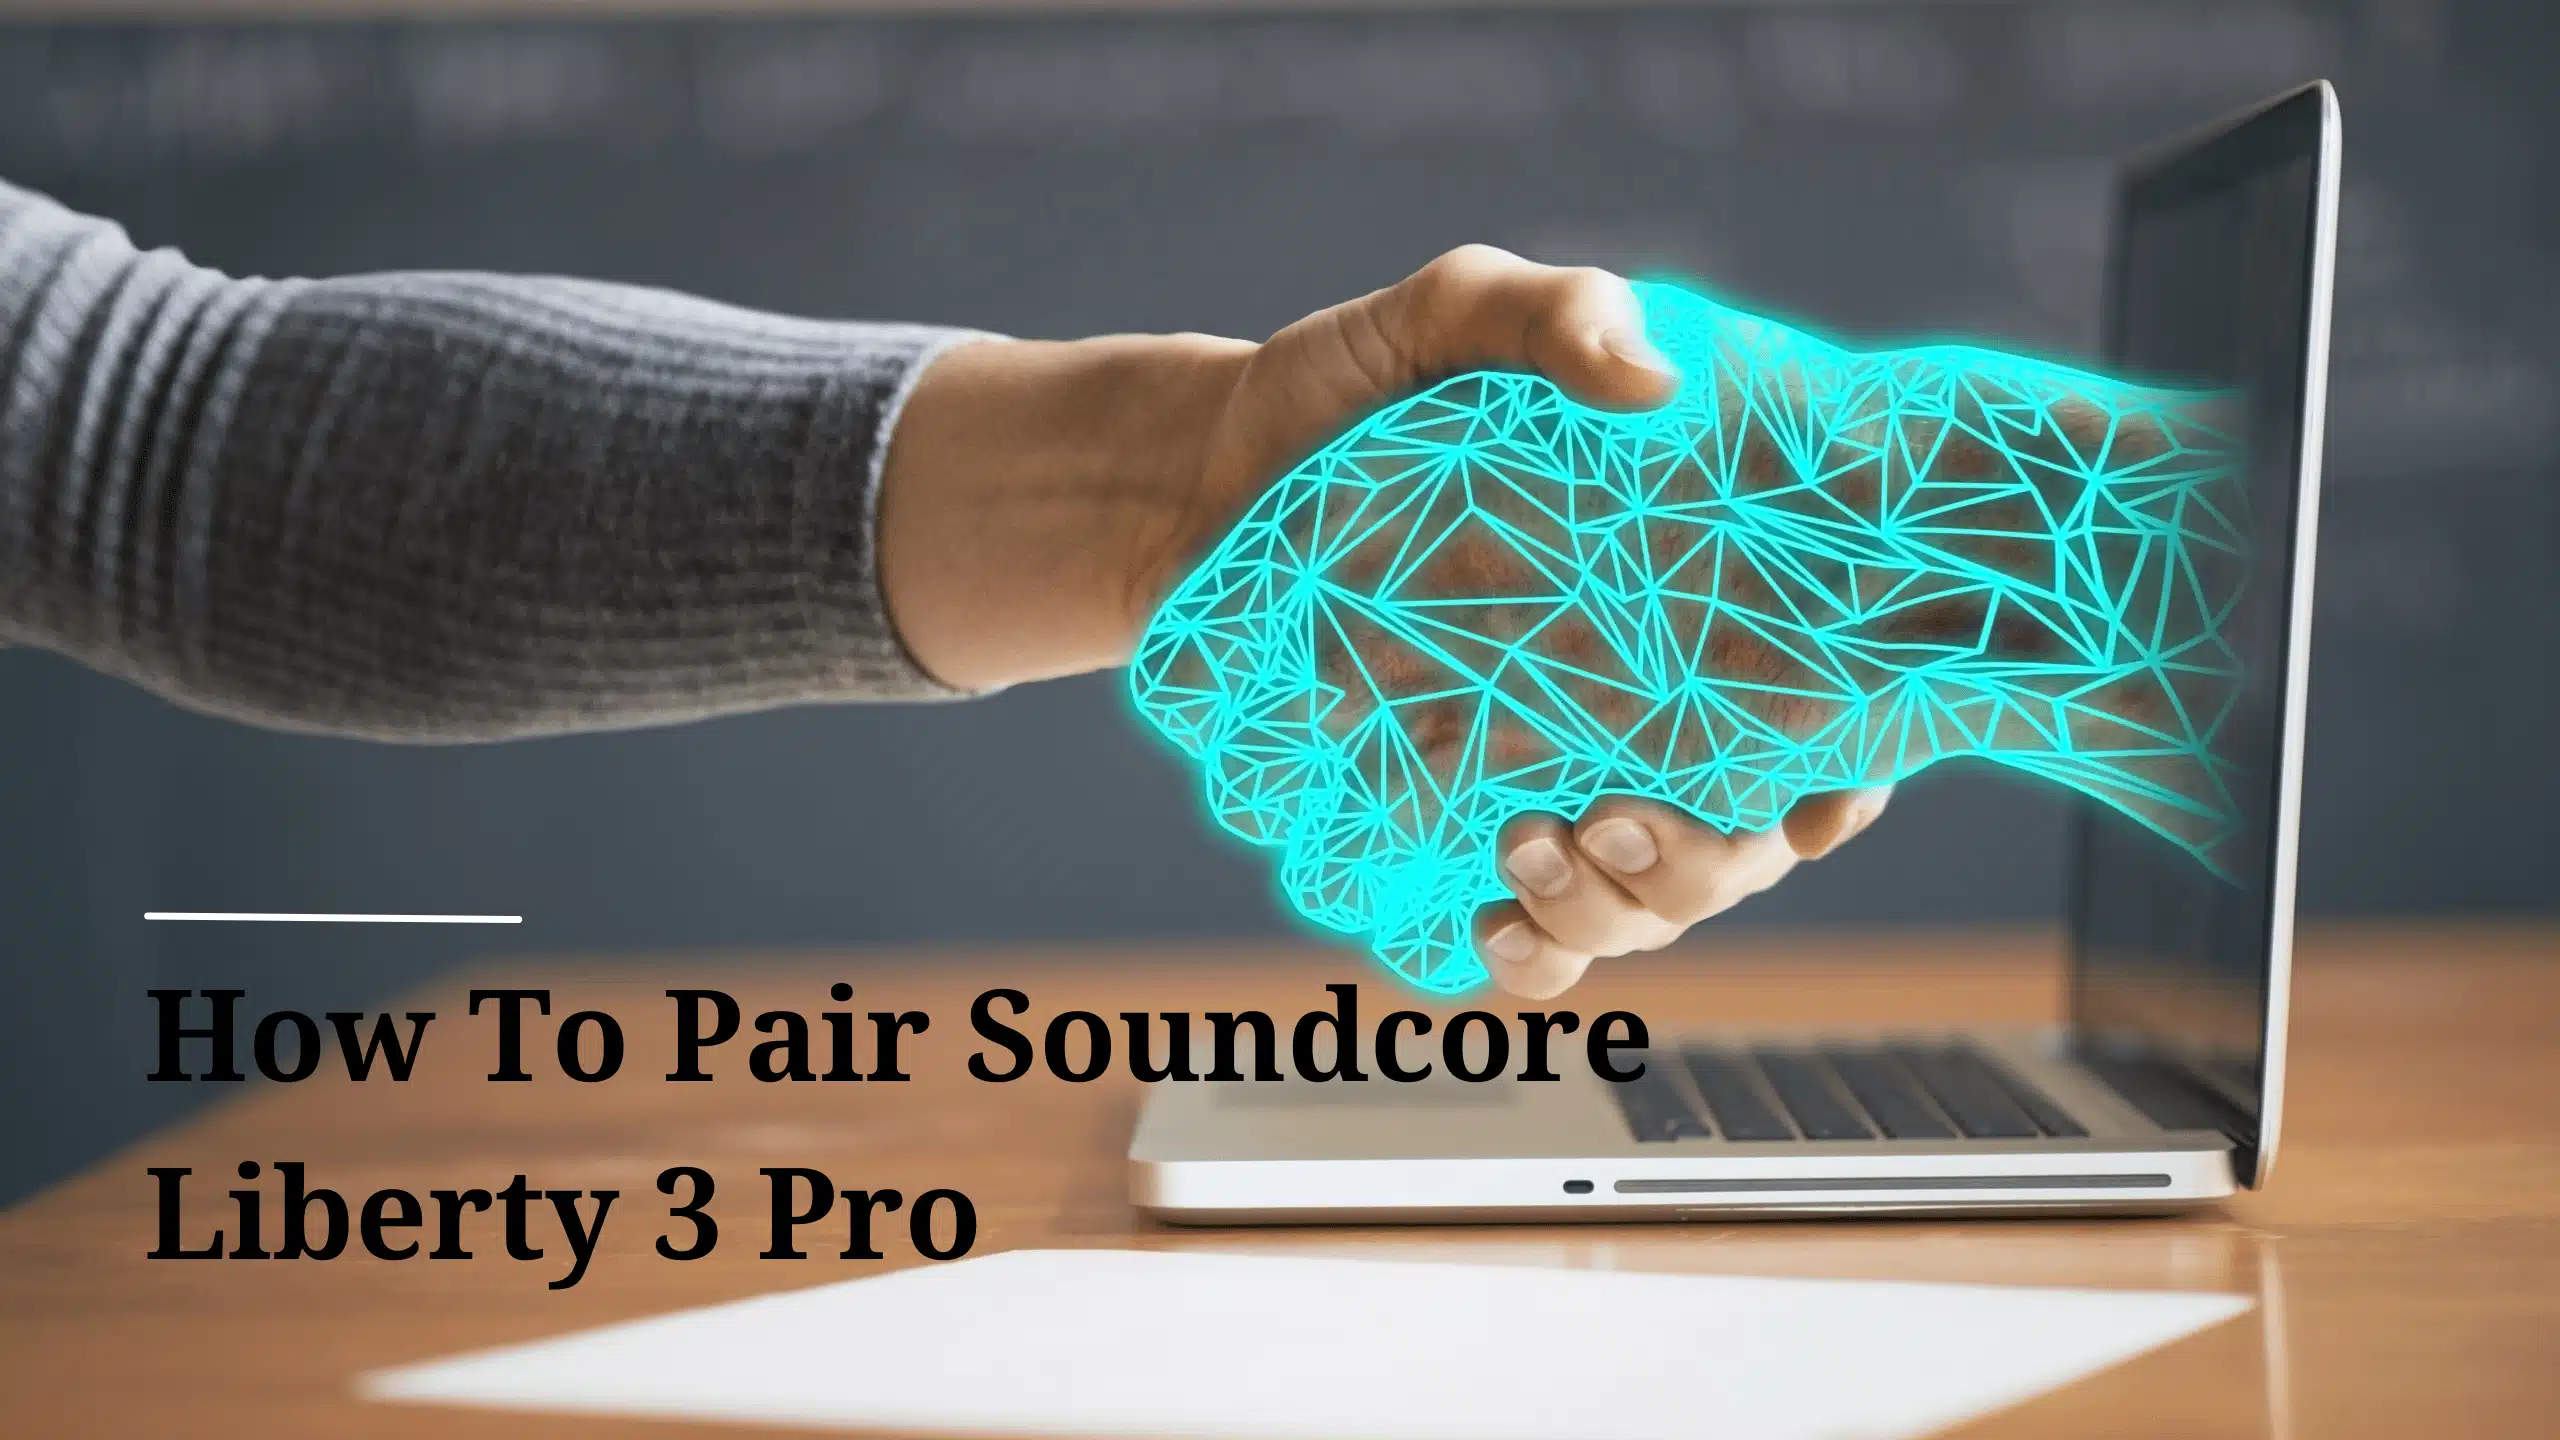 How To Pair Soundcore Liberty 3 Pro